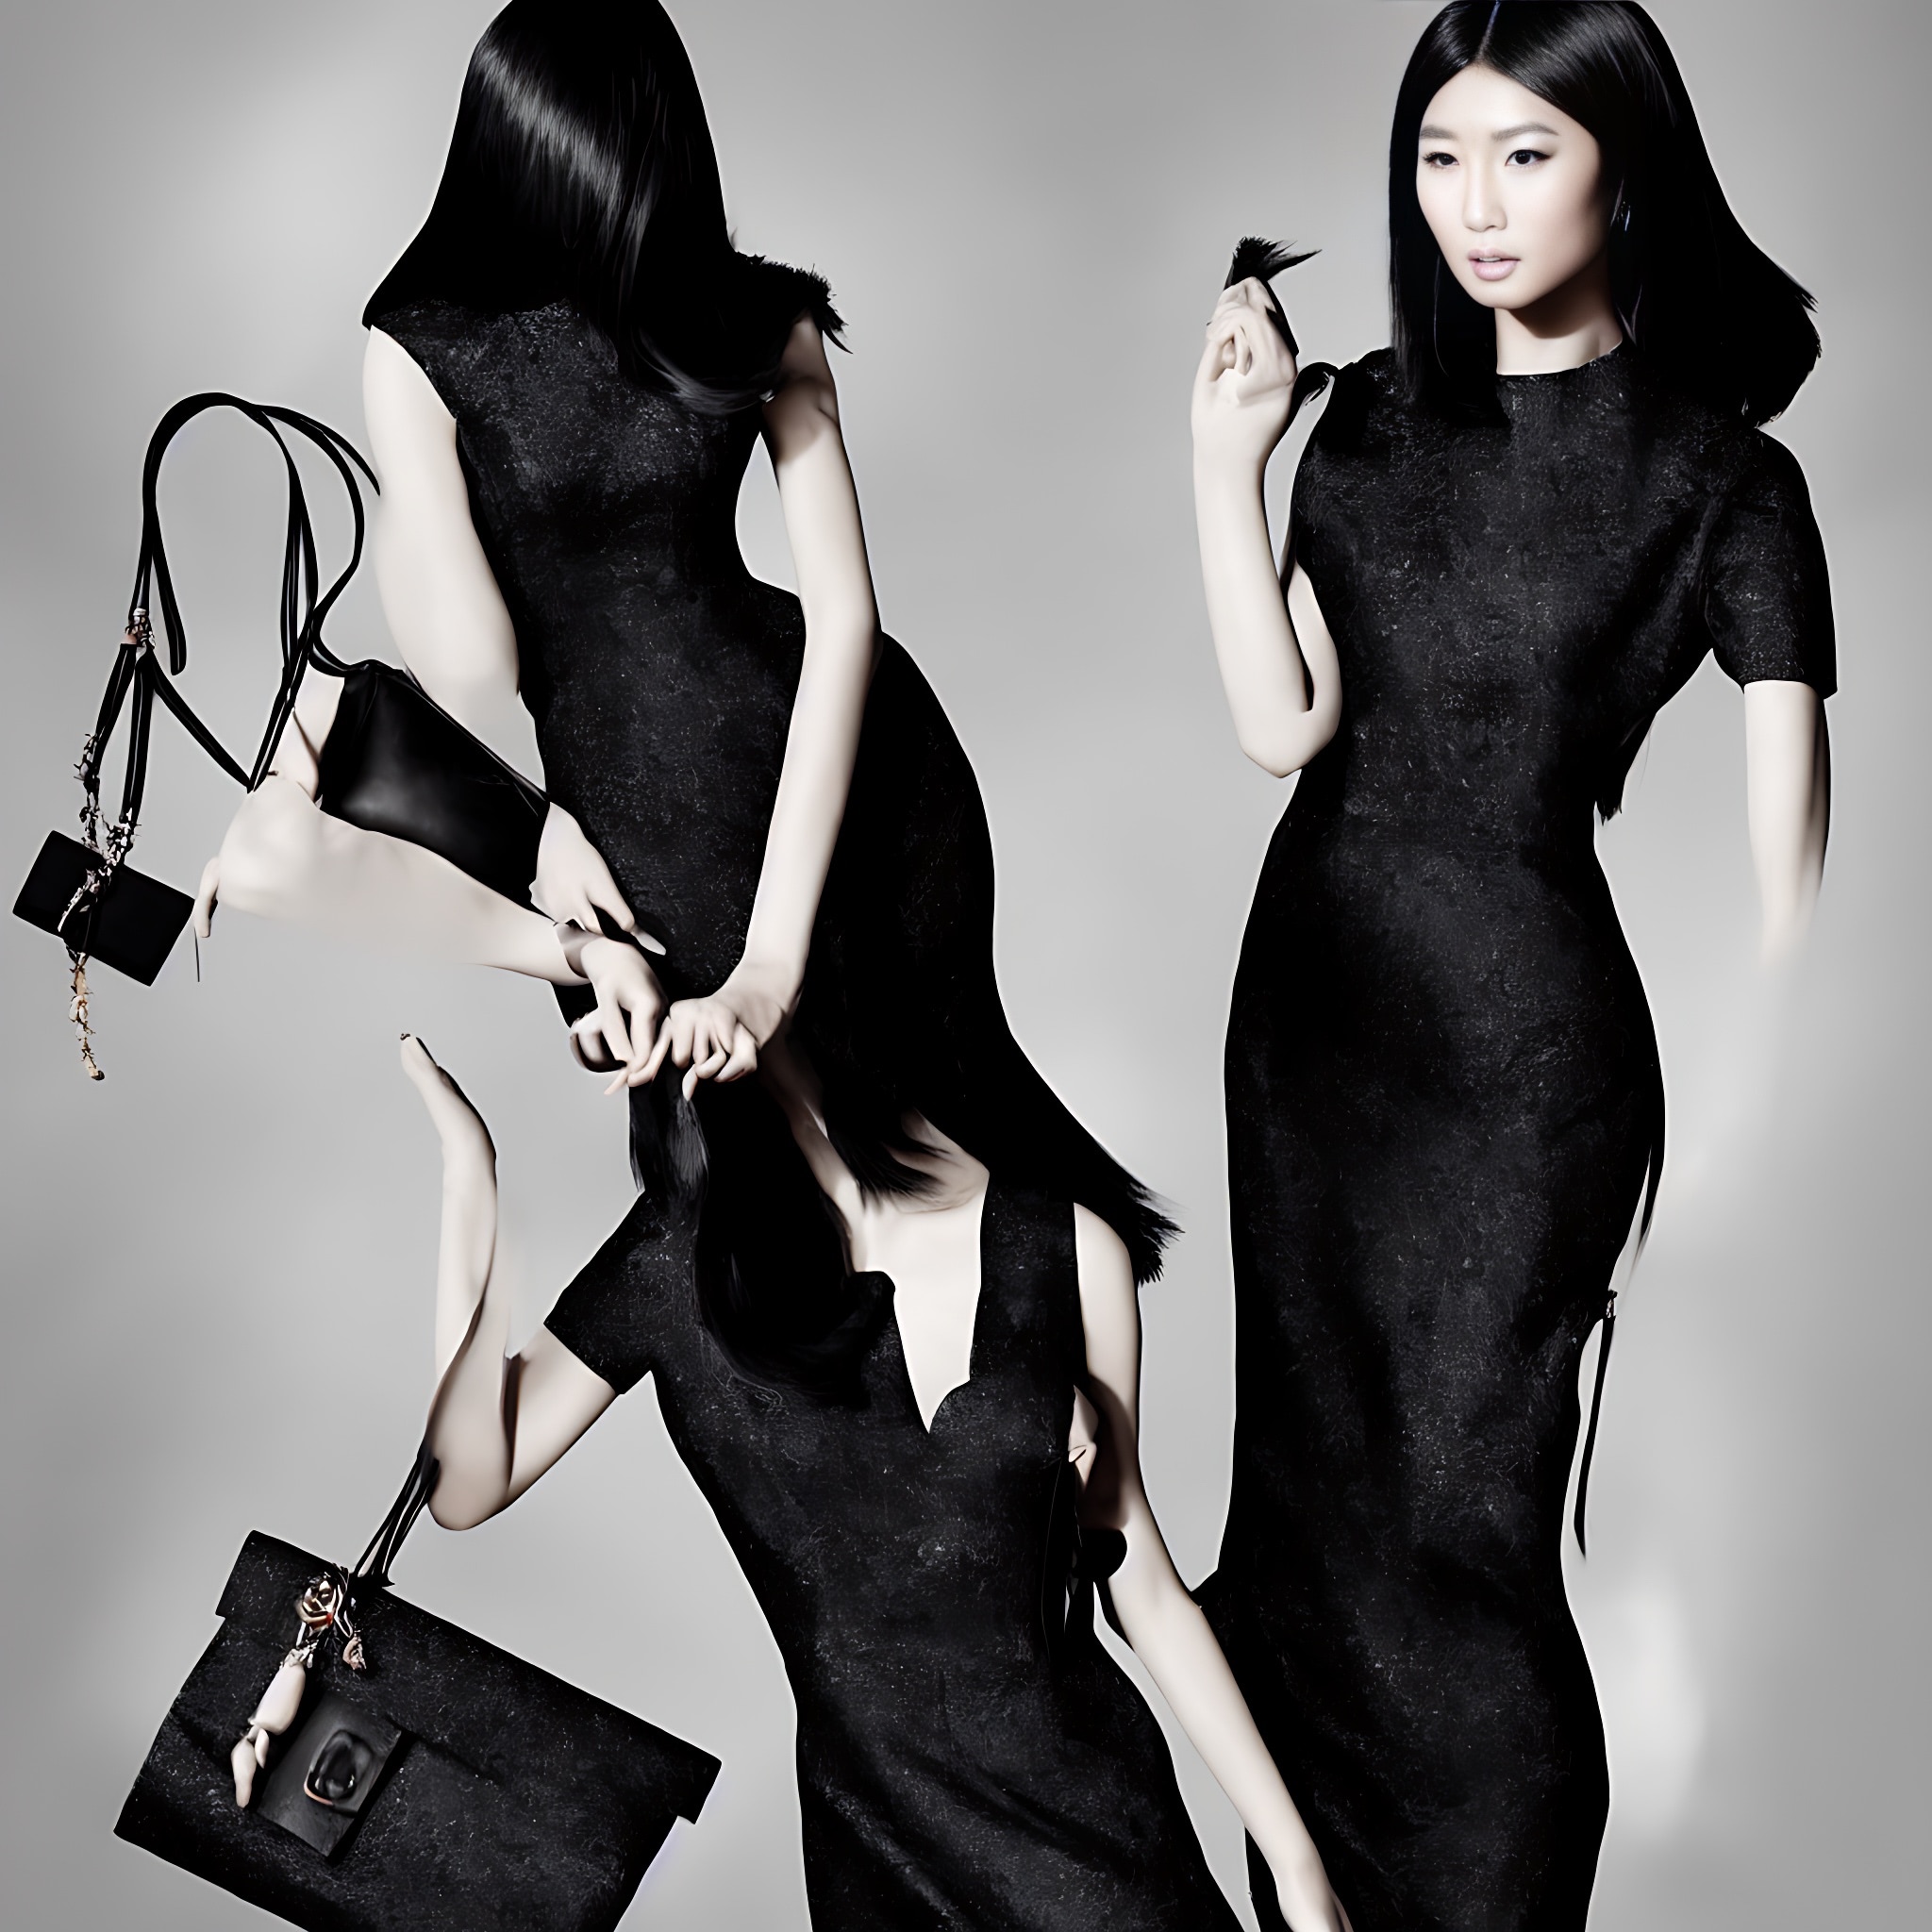 asian-fashion-advertisement-in-the-2070s-model-2